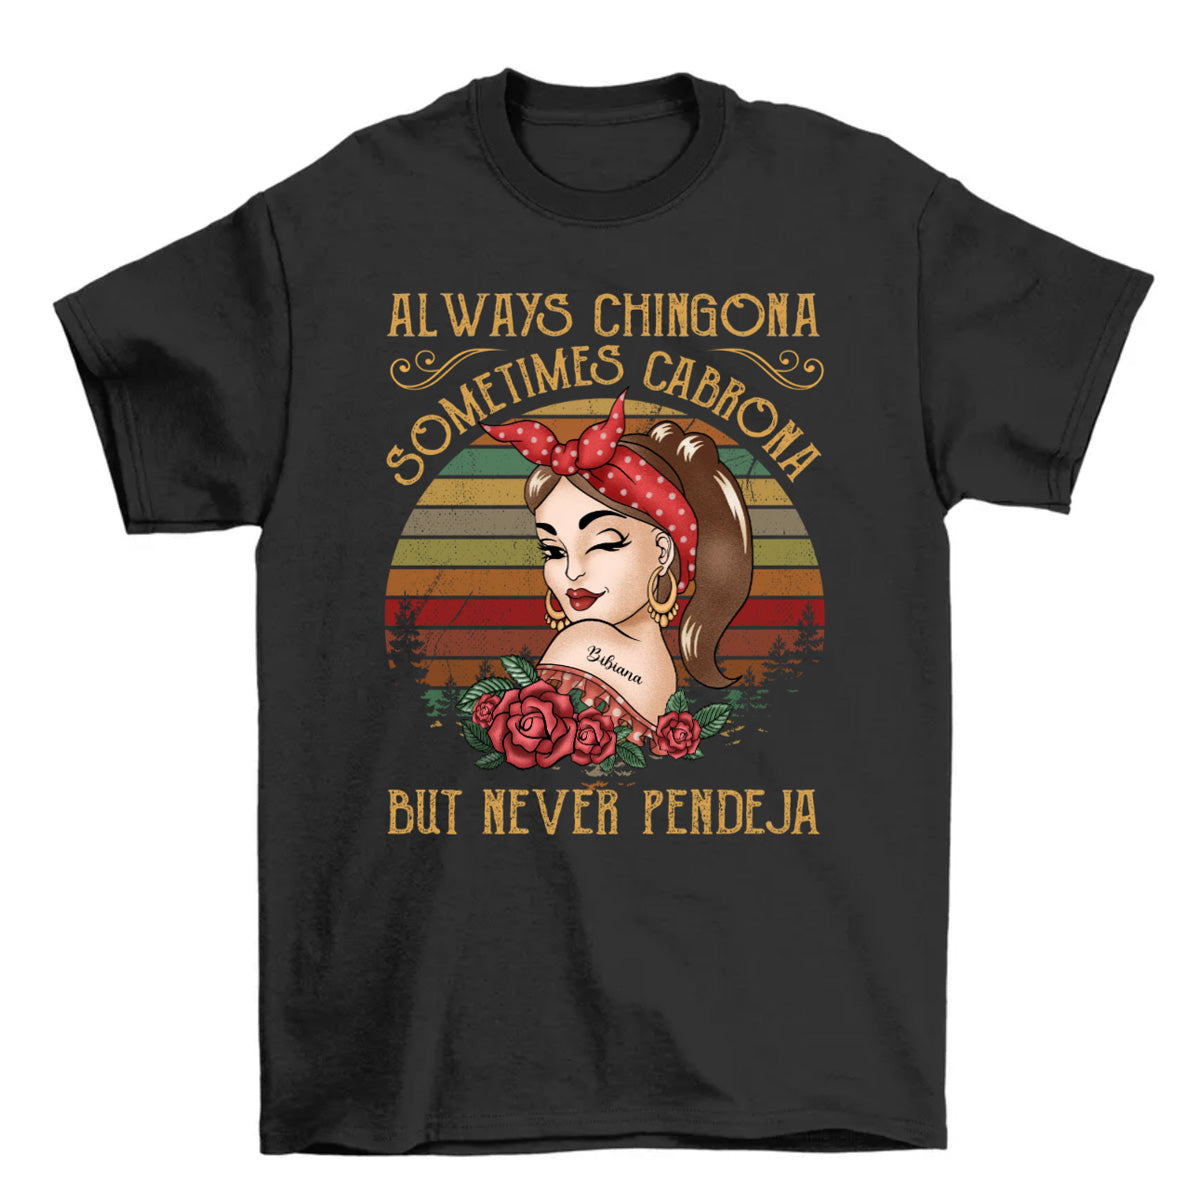 Always Chingona Sometimes Cabrona But Never Pendeja - Personalized Shirt - Vintage Girl